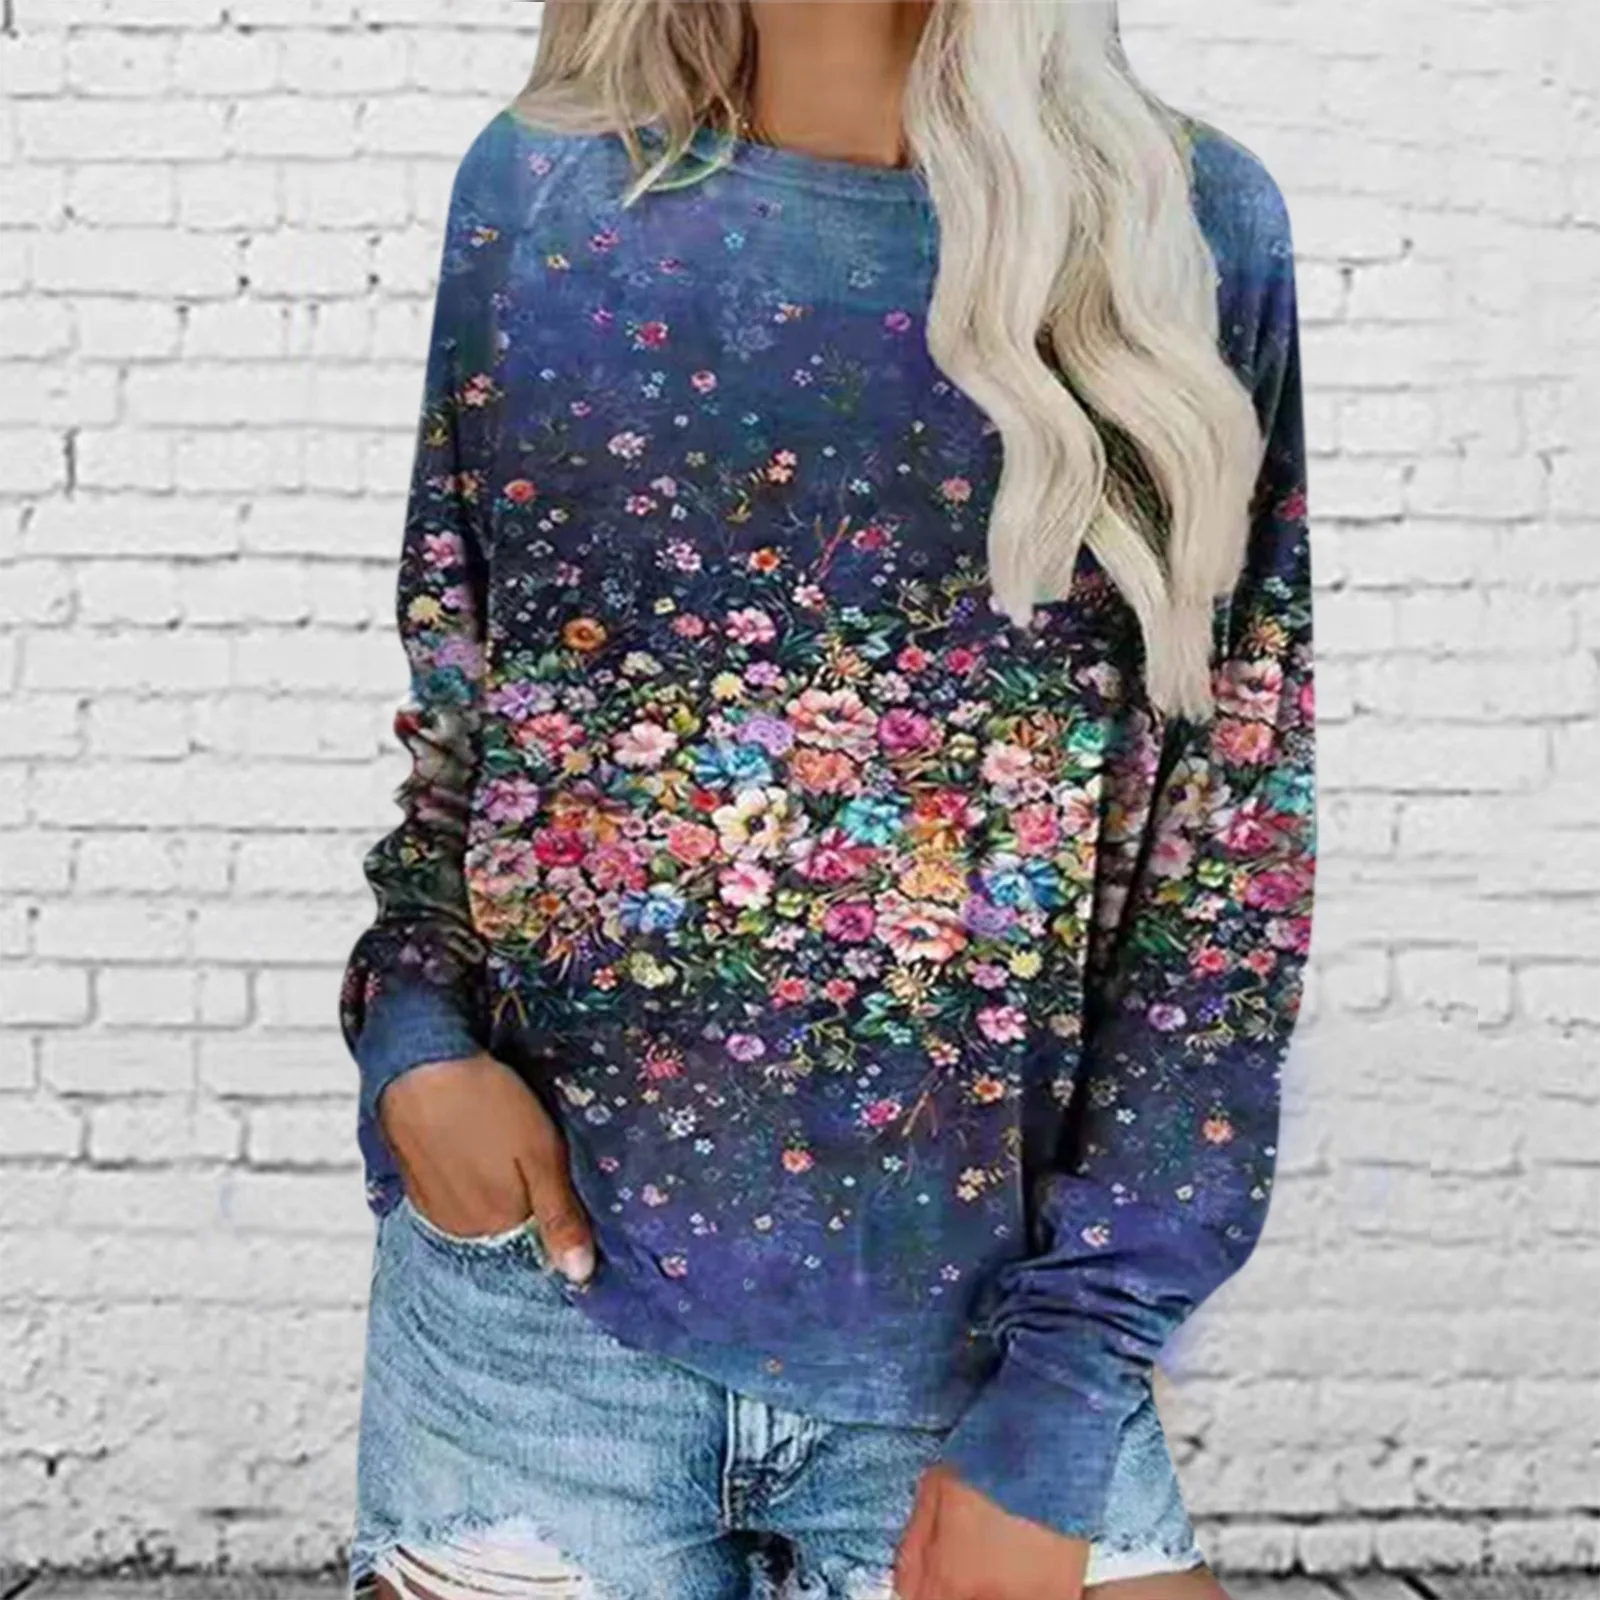 

Winter Spring Womens Casual T-shirts Long Sleeve Flower Print Aesthetic Tee Vintage Crewneck Loose Tops 2021 Ropa Mujer A40